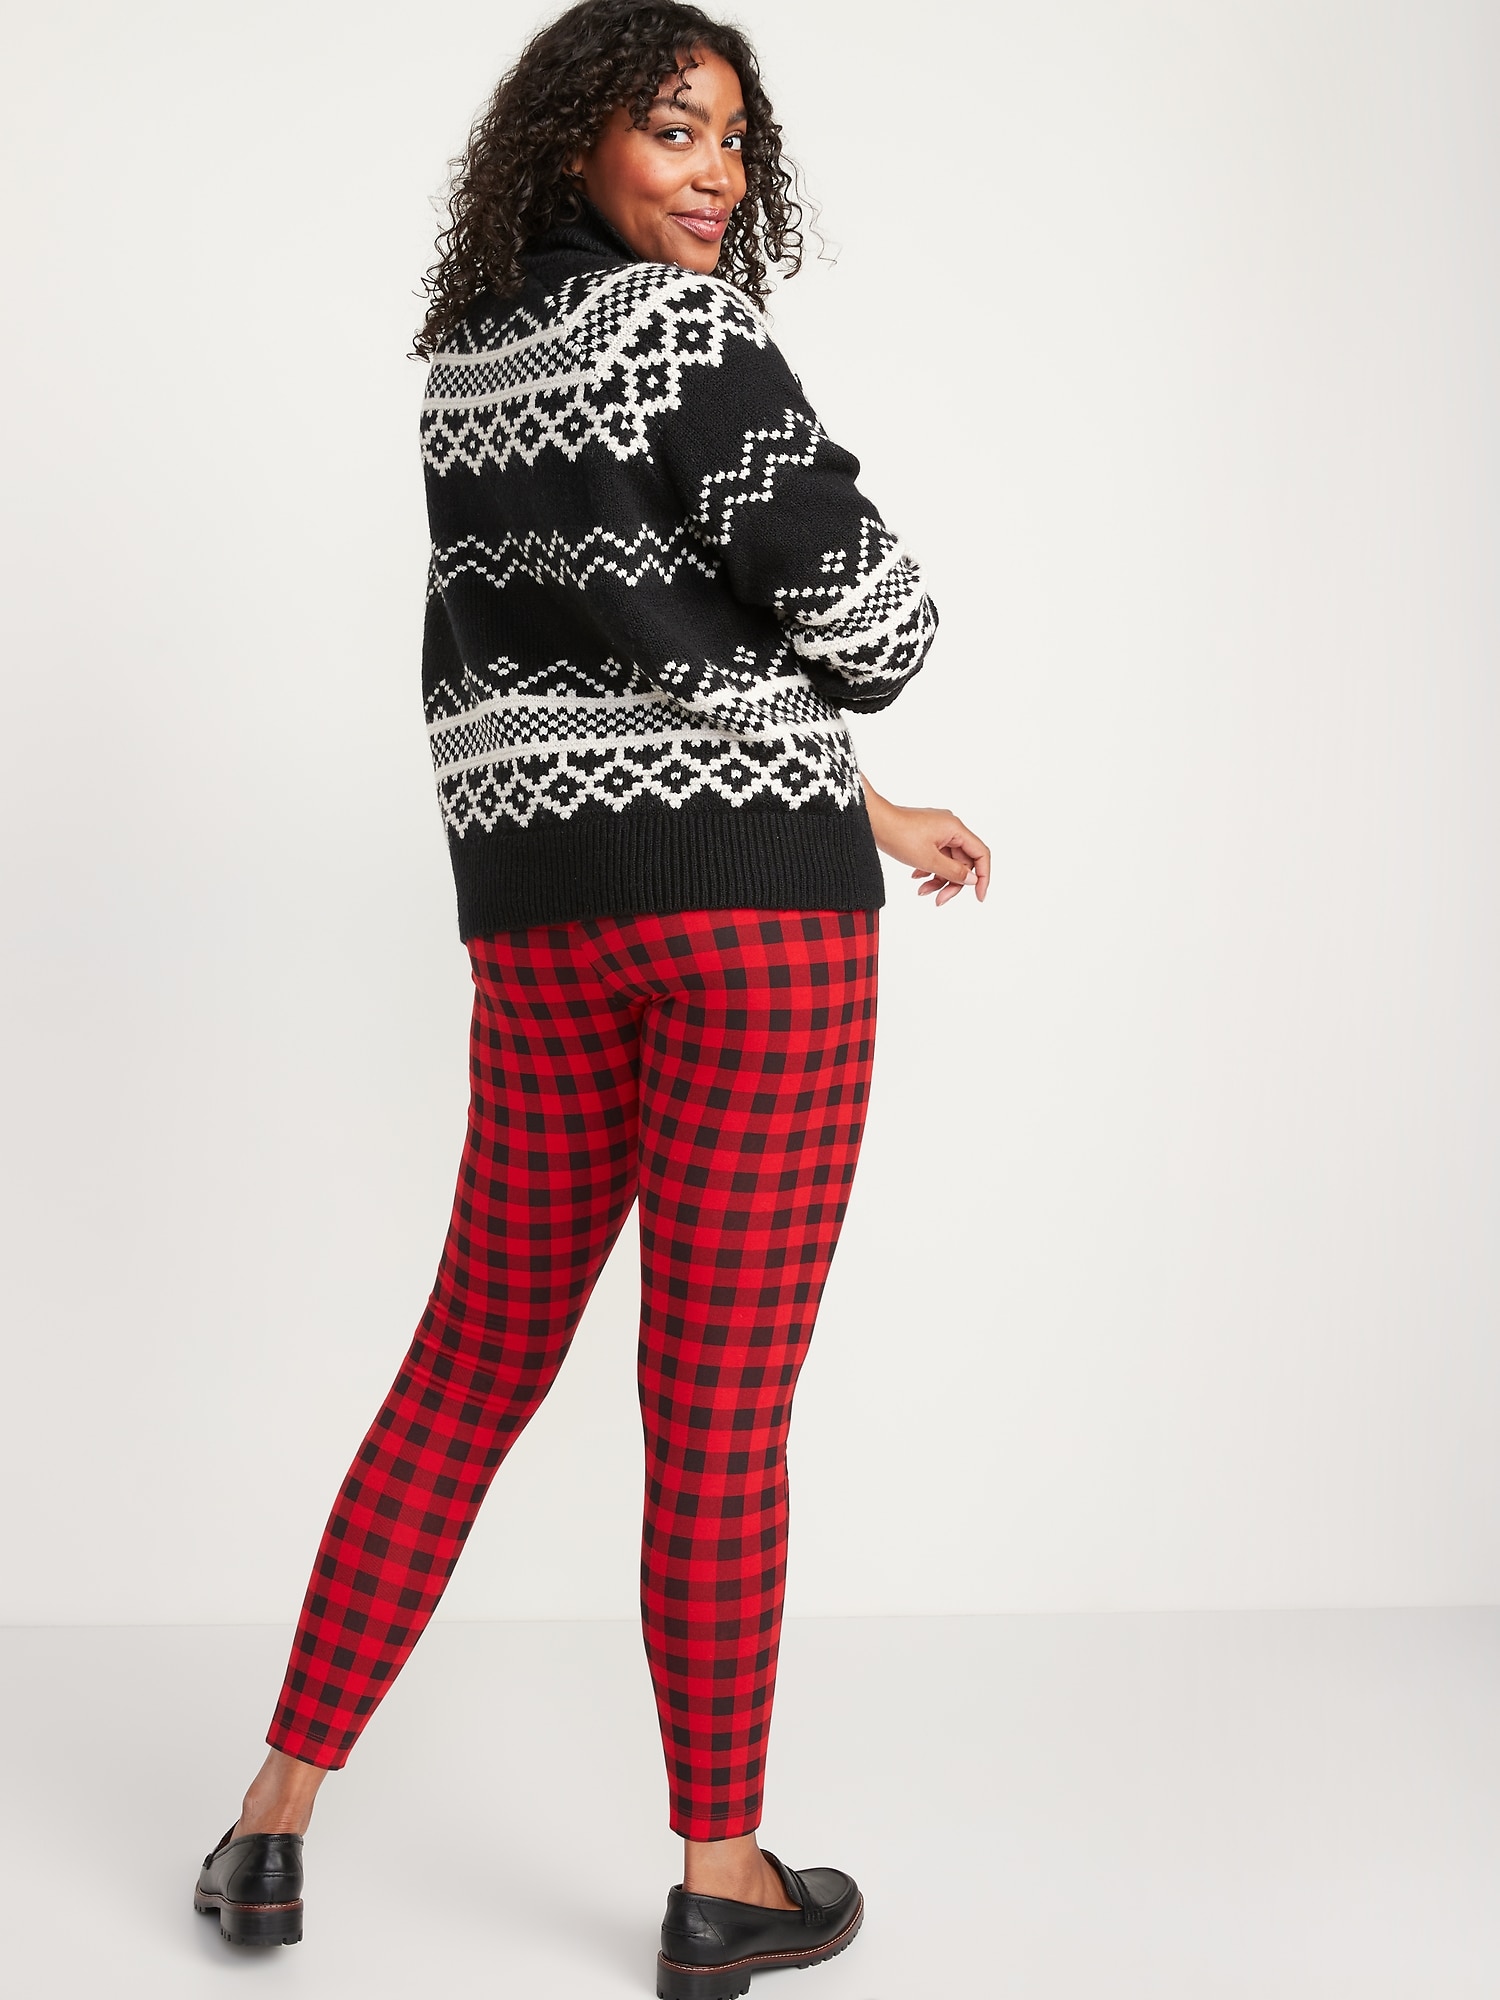 Kids Buffalo Plaid Red and Black Leggings | MMofPhilly